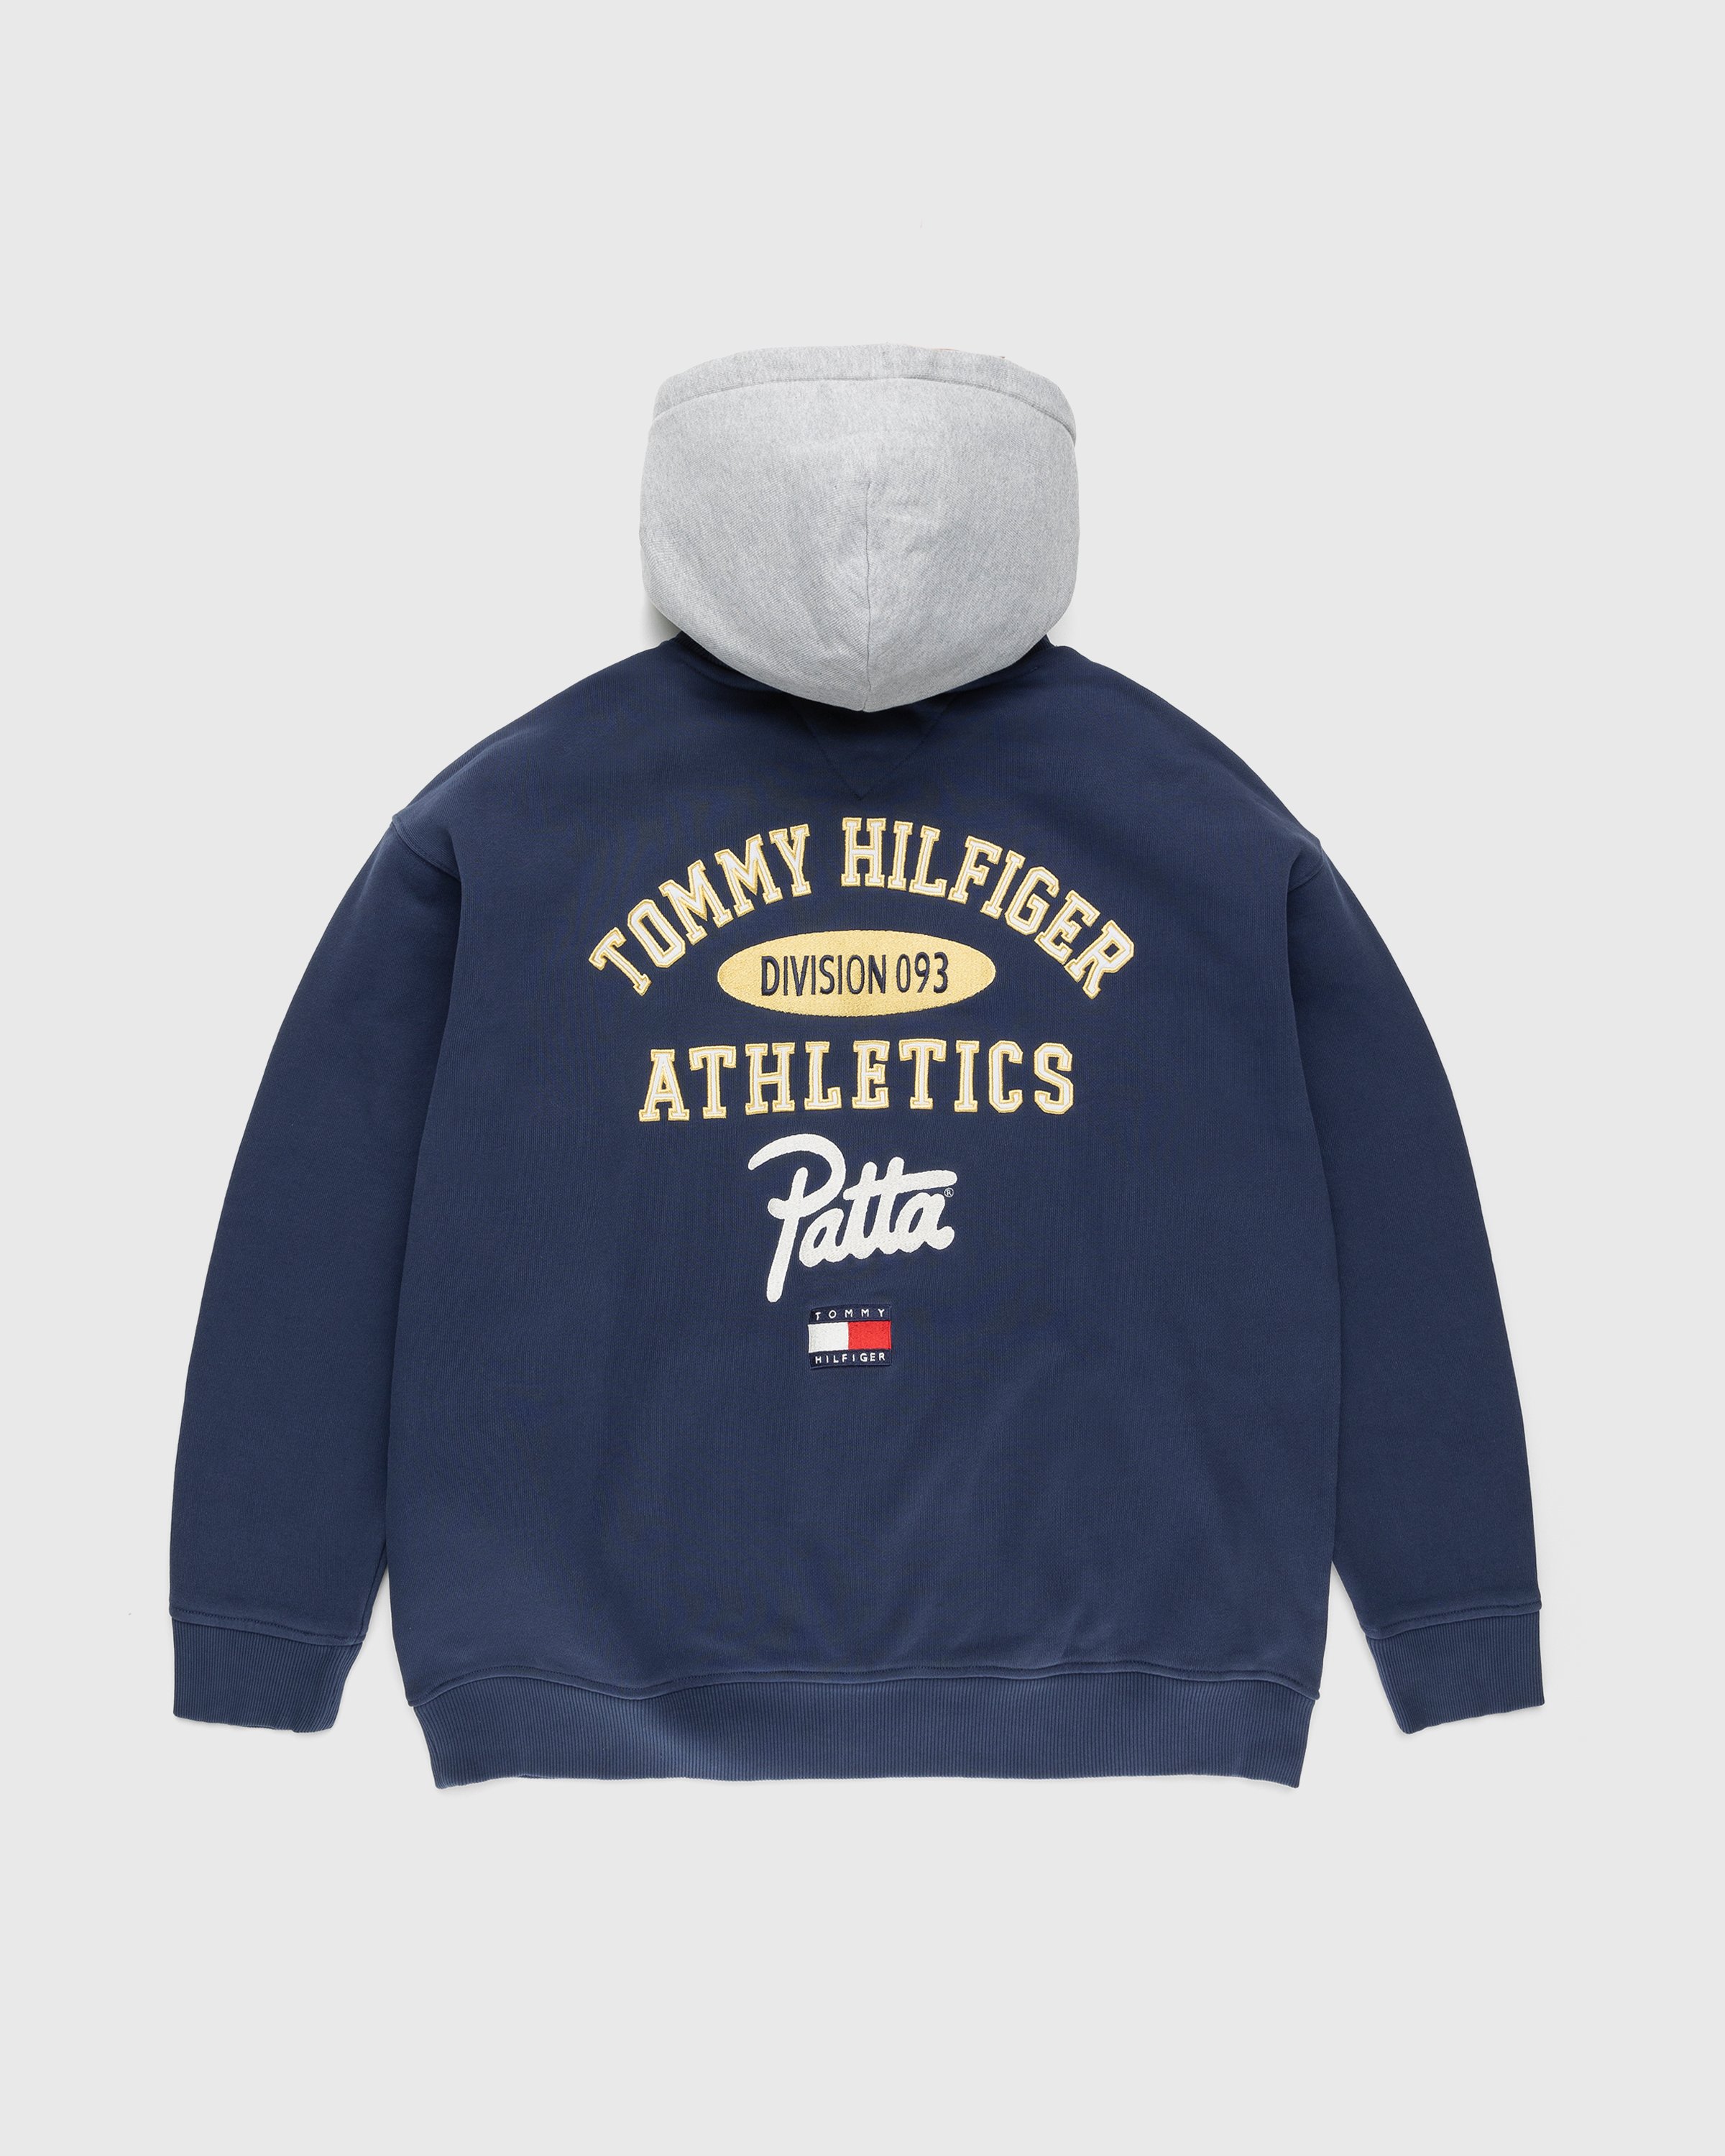 Patta x Tommy Hilfiger - Hoodie Sport Navy - Clothing - Blue - Image 2